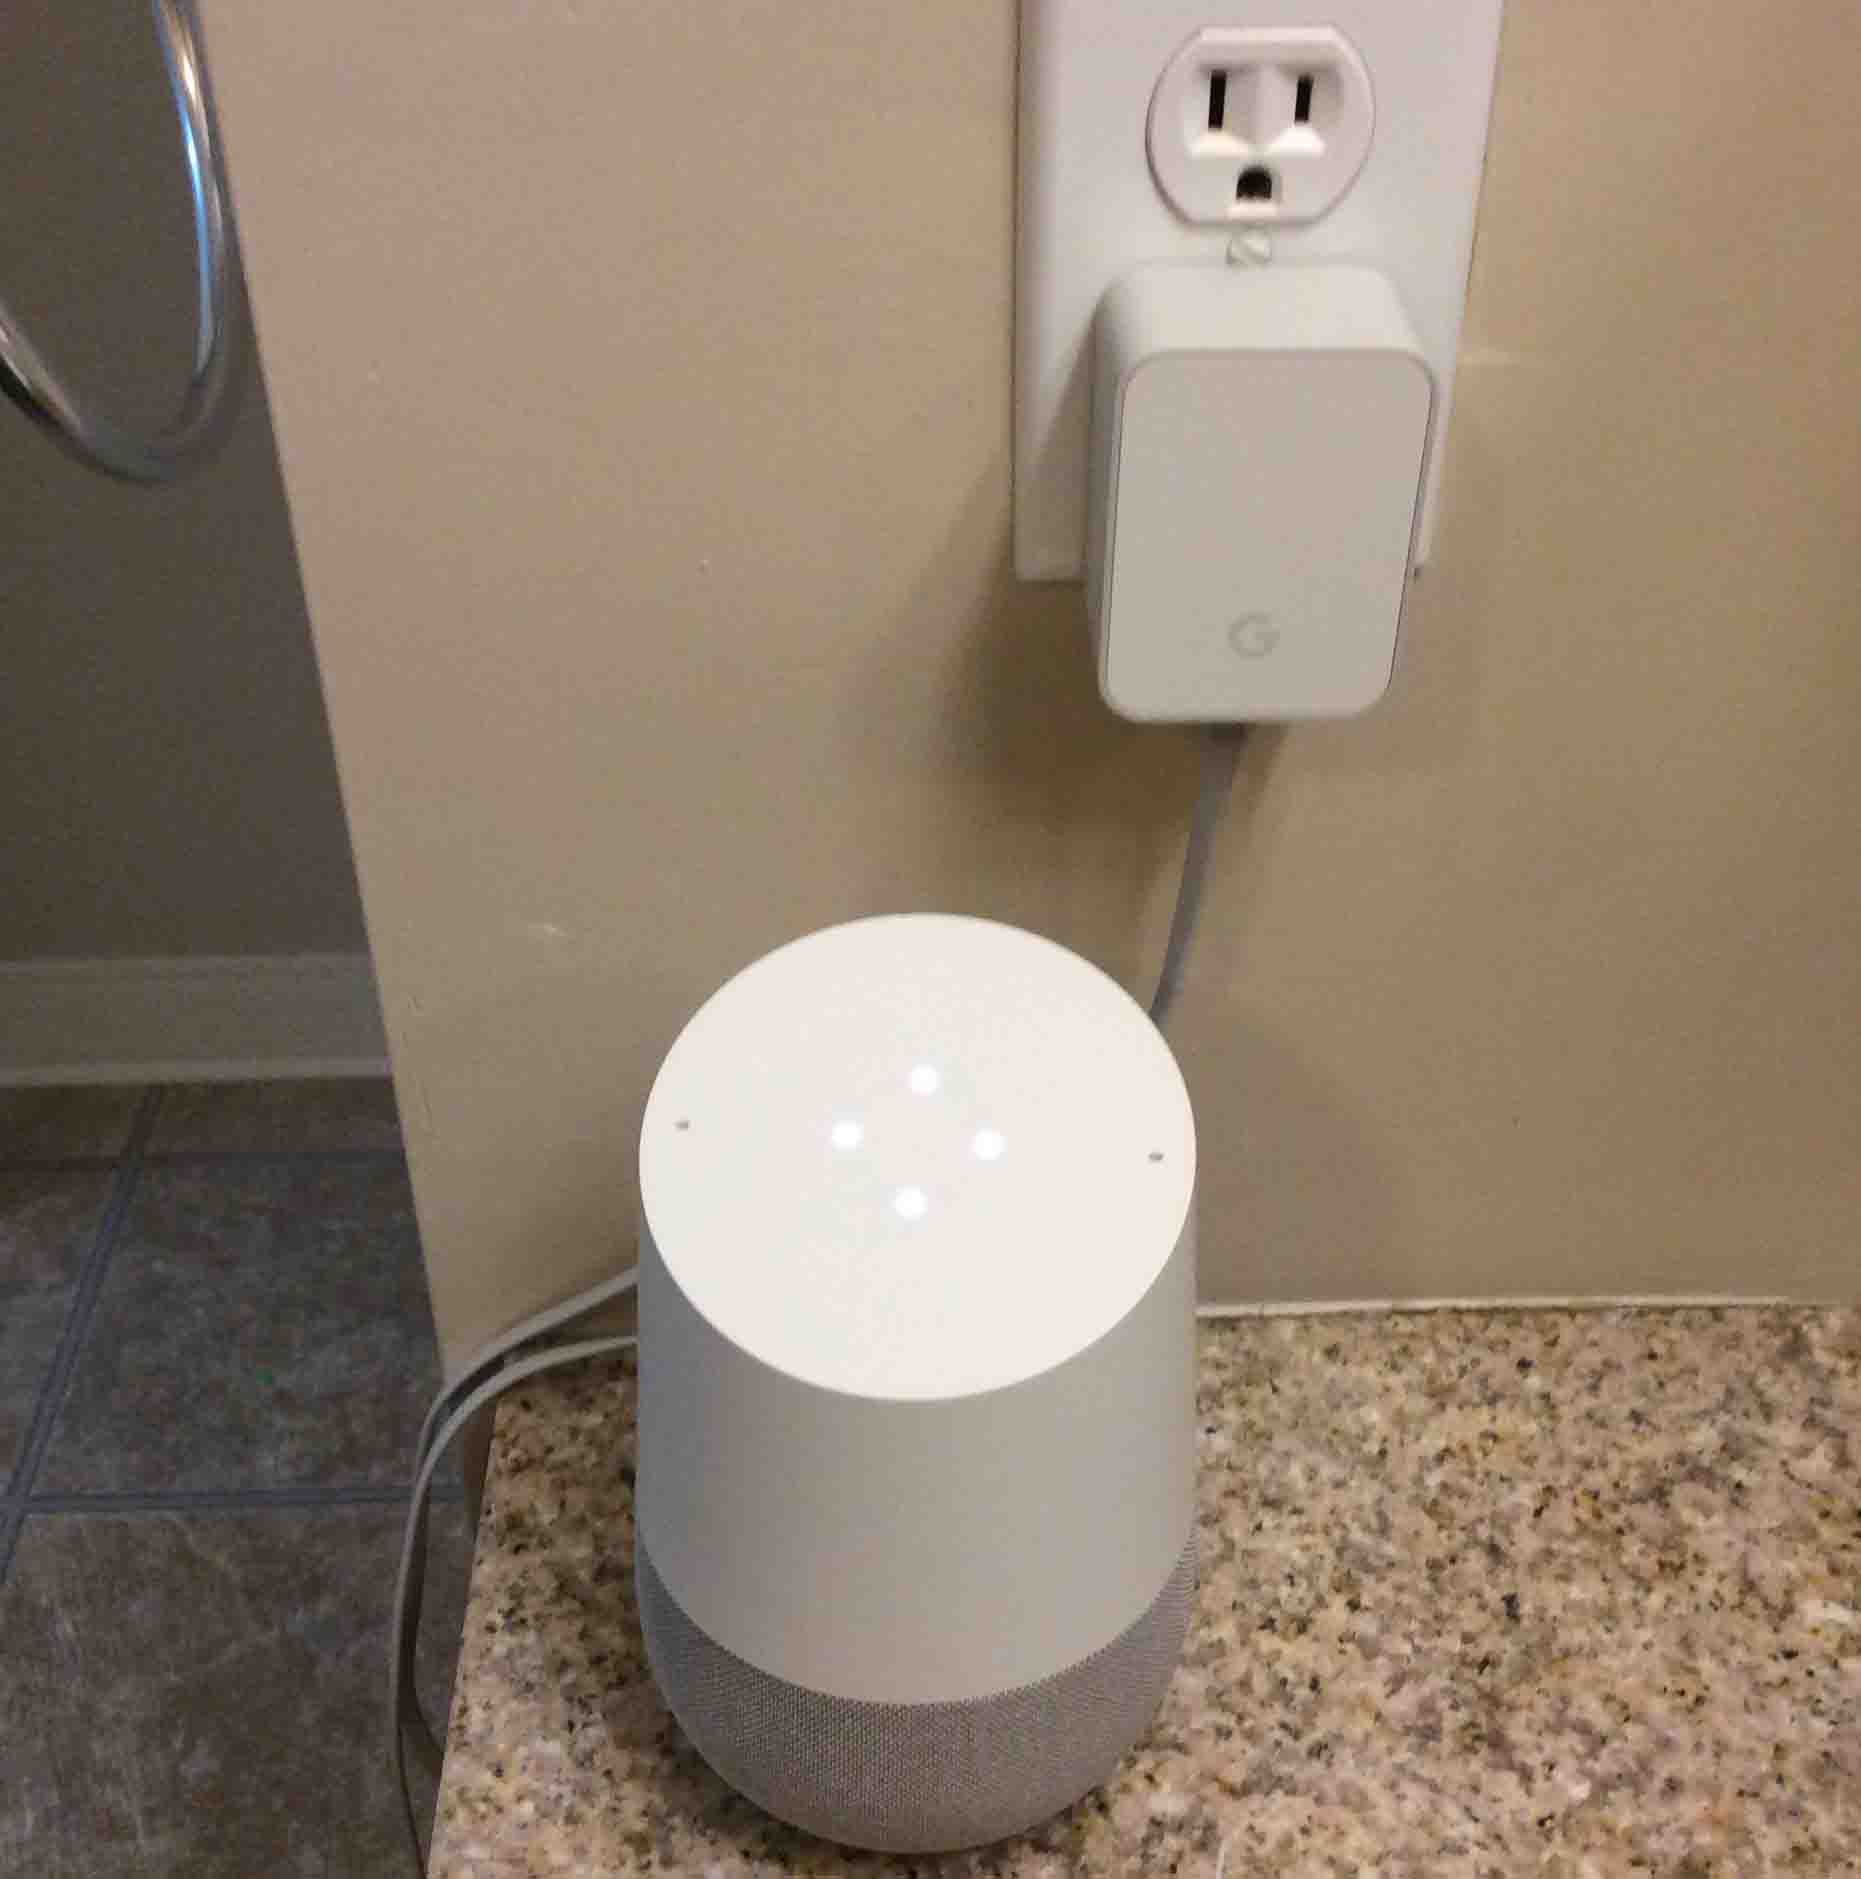 Turn off the Google Home and plug the power adapter in.